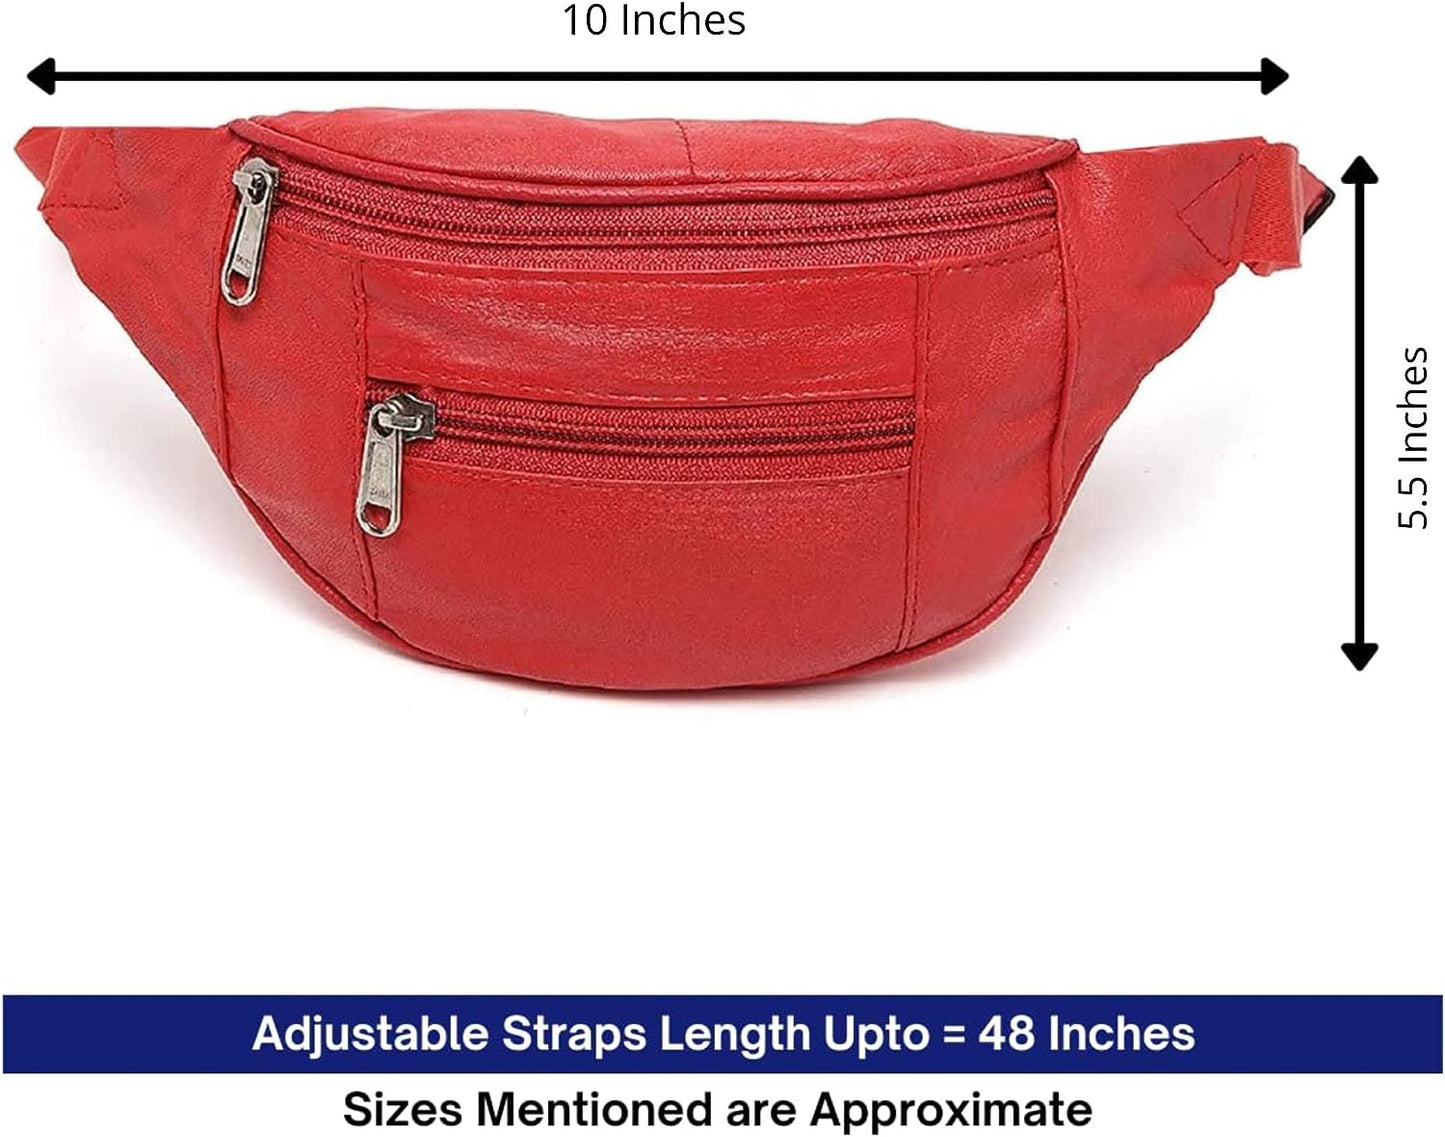 Liberty Leather Small Fanny Pack Crossbody Bags For Women Waist Bum Hip Bag For Women Mini Belt Bag Cute Fanny Pack for Teen Girls Red